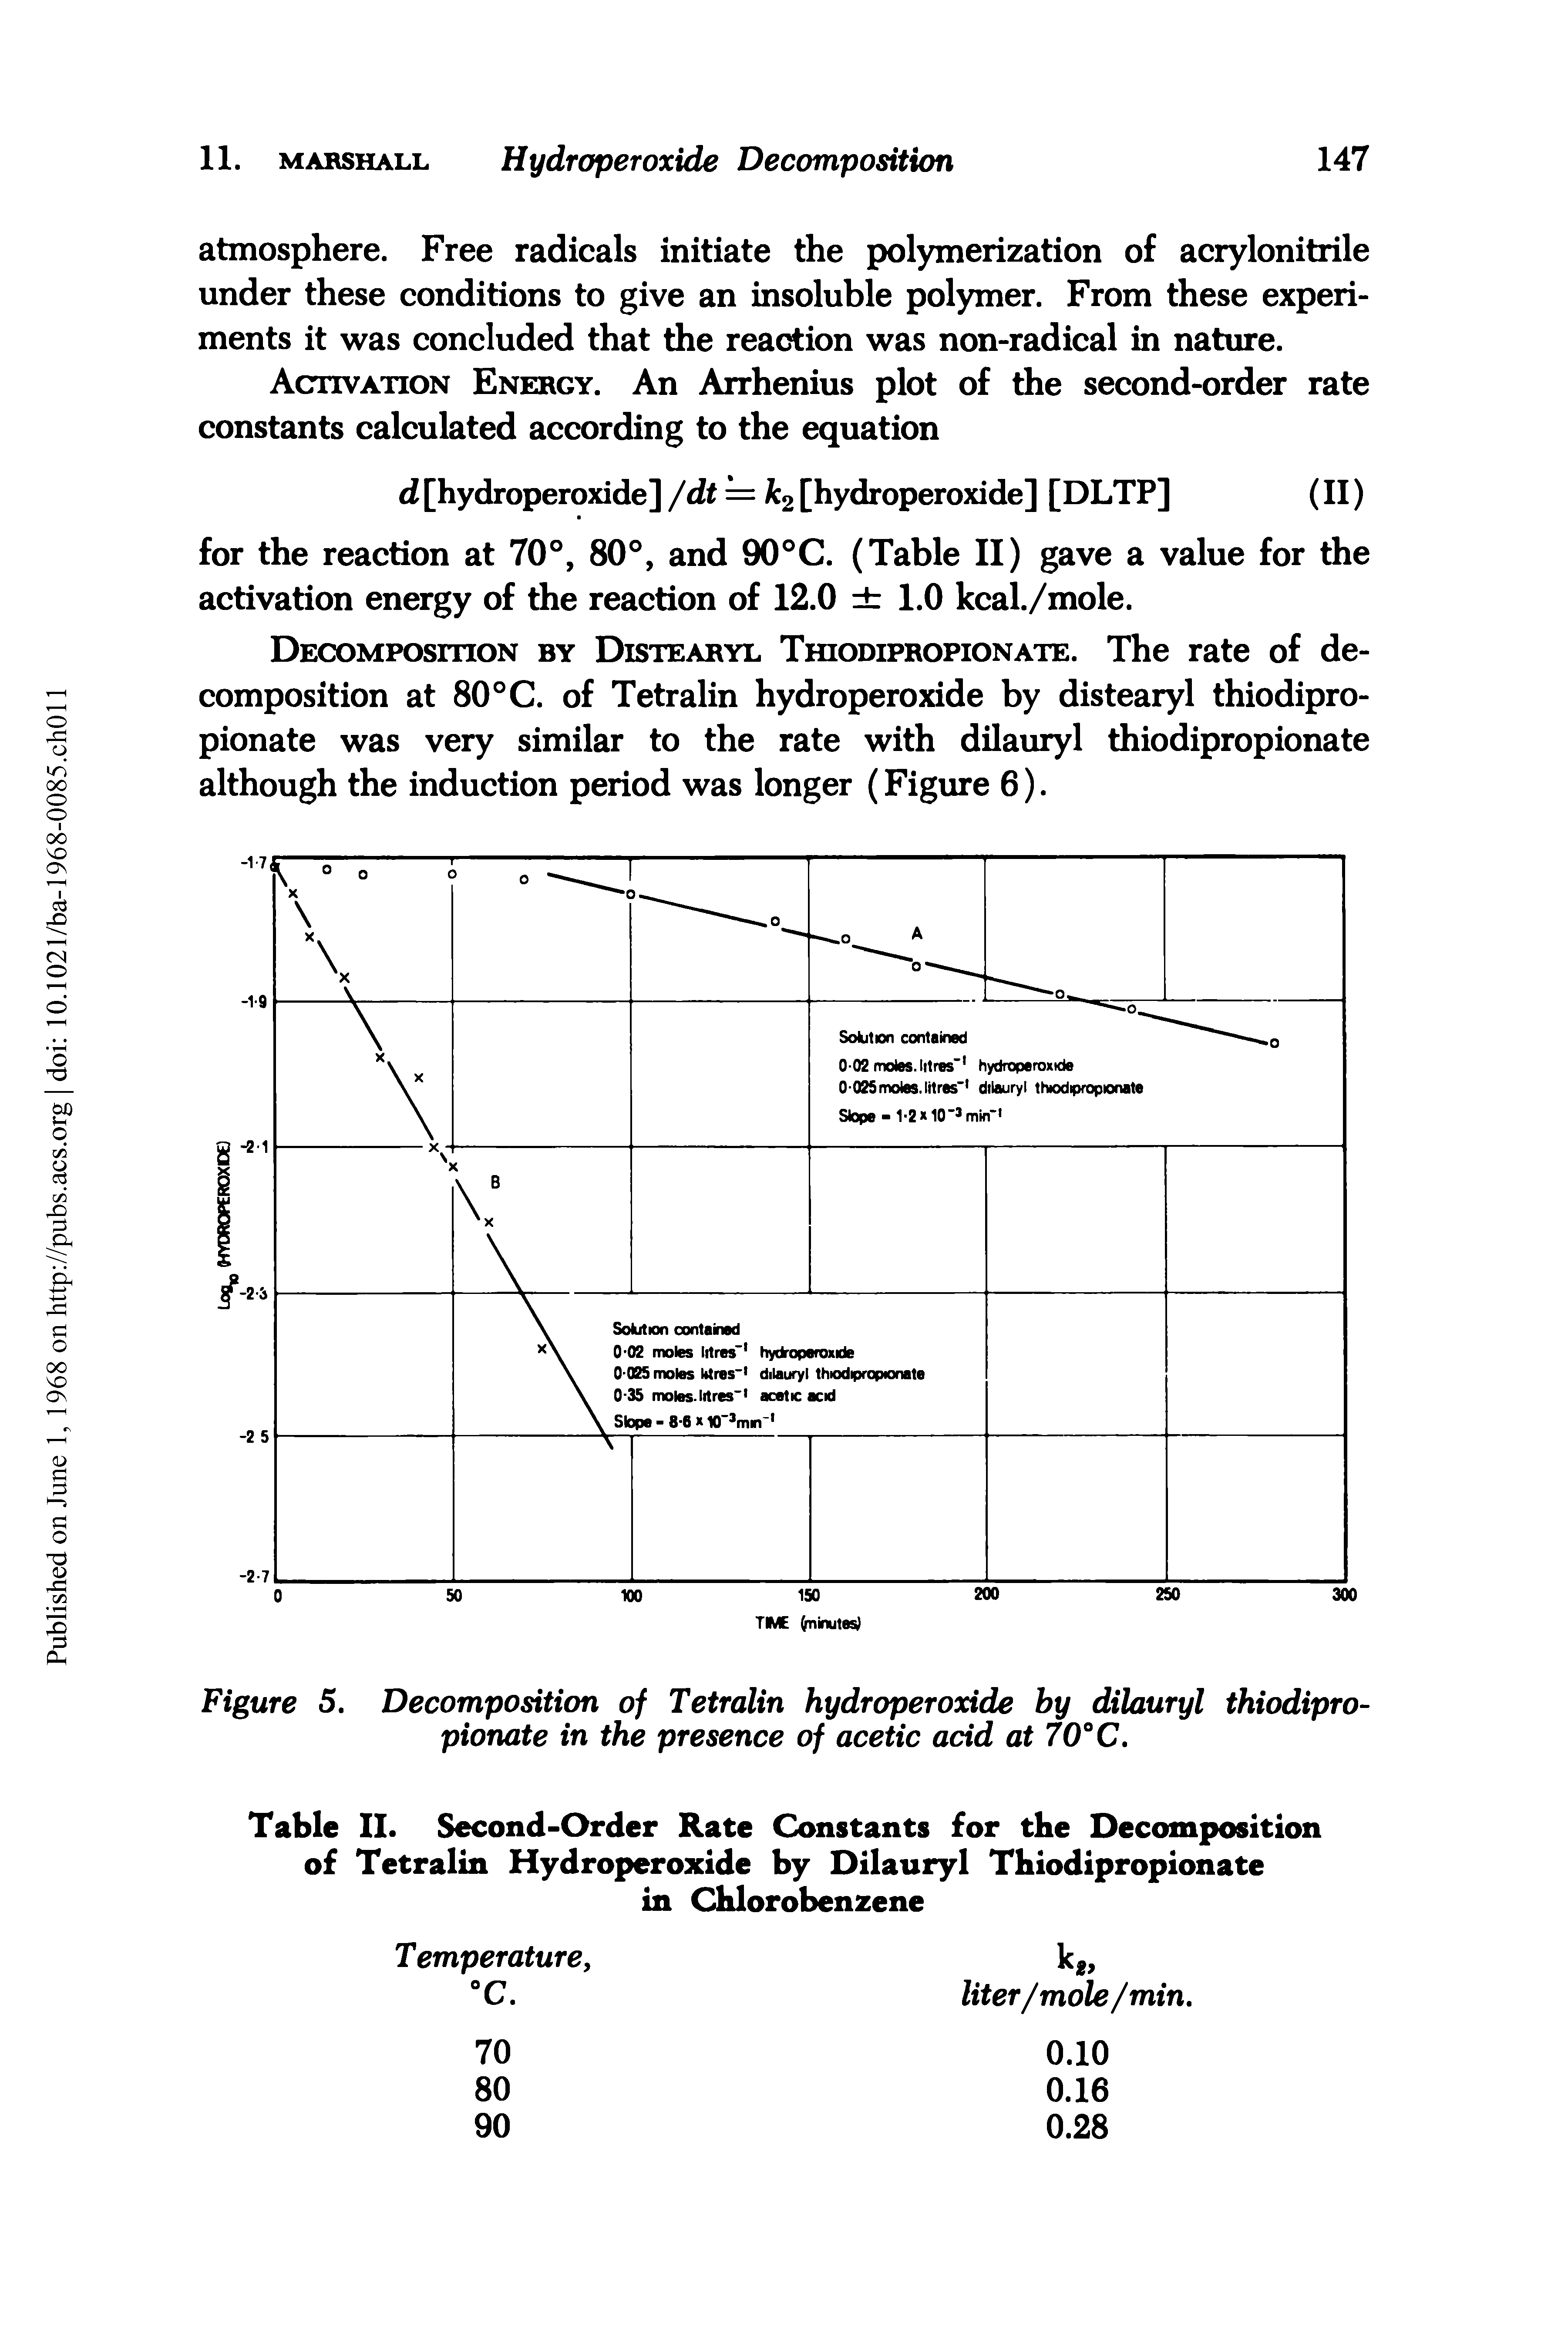 Figure 5. Decomposition of Tetralin hydroperoxide by dilauryl thiodipropionate in the presence of acetic acid at 70° C.